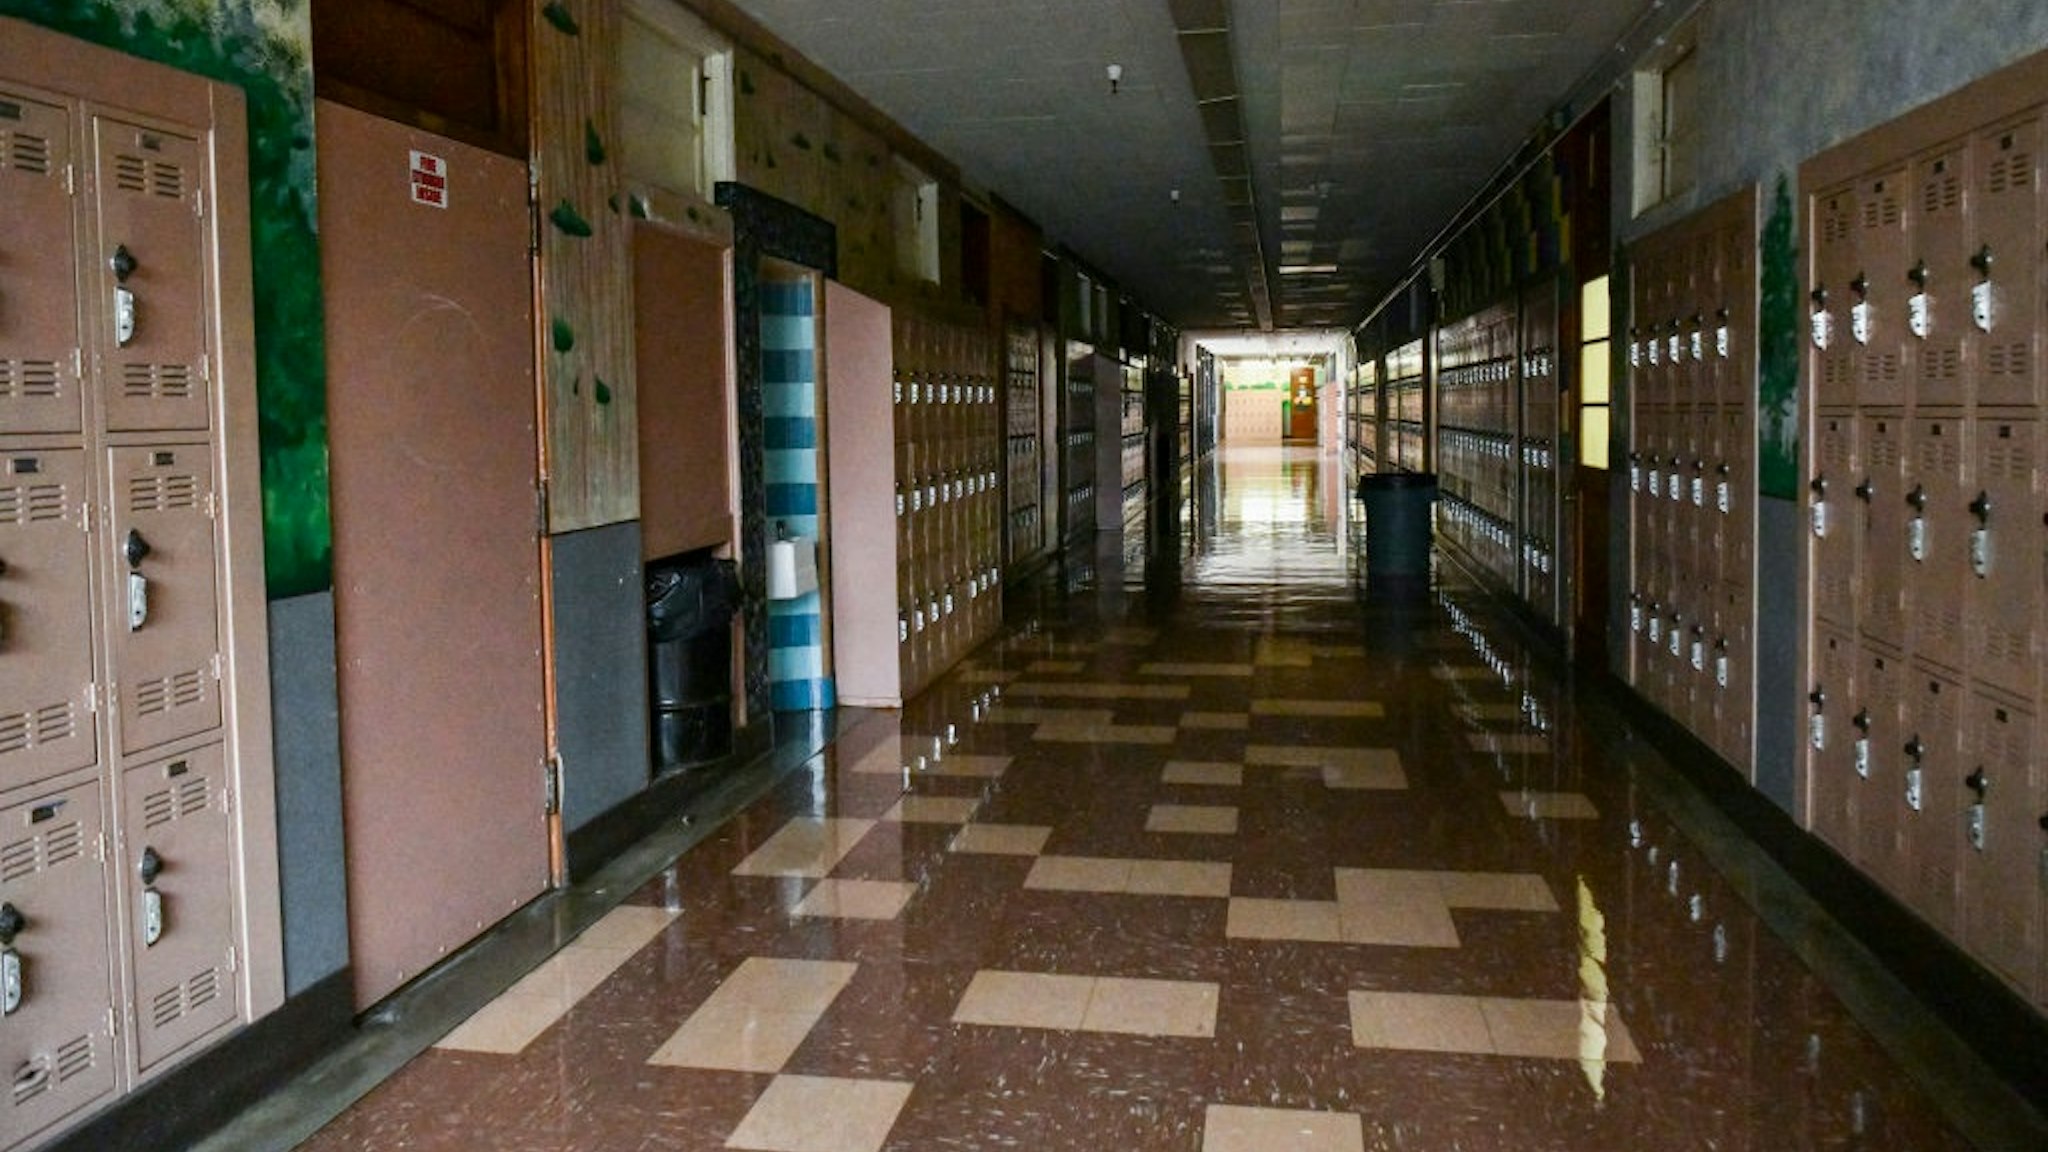 LOS ANGELES, CALIFORNIA - SEPTEMBER 08: Empty Hollywood High hallway on September 08, 2020 in Los Angeles, California. LAUSD school campuses remain closed during the COVID-19 pandemic, however many teachers are opting to broadcast lessons virtually from their empty classrooms.